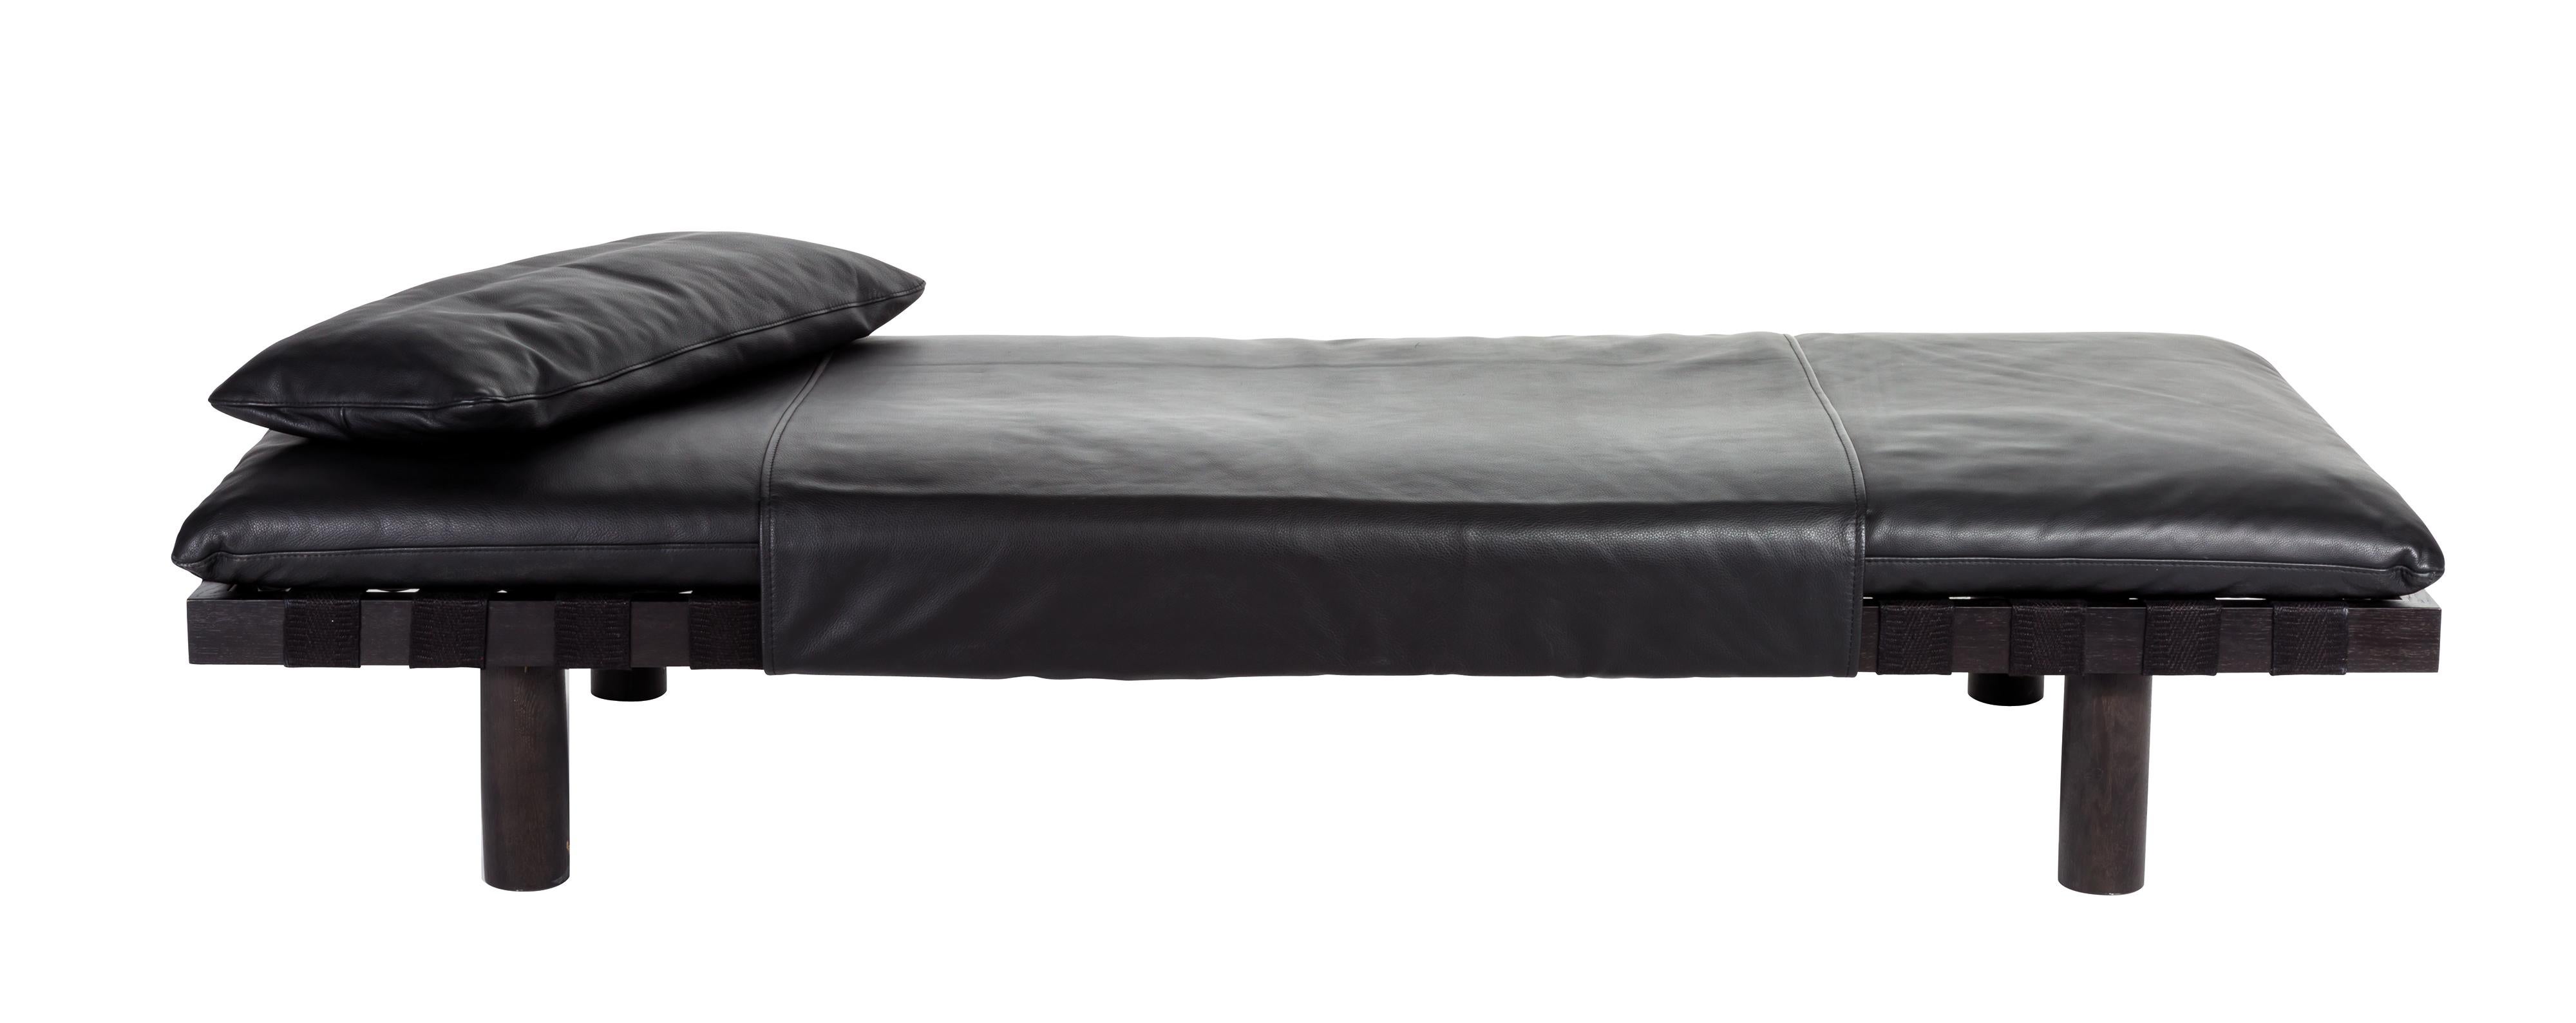 Pallet black leather black day bed by Pulpo
Dimensions: D200 x W80 x H29 cm
Materials: fabric/leather, foam and wood

Also available in different colours and finishes.

Thinking about the first significant furniture for pulpo with the typical